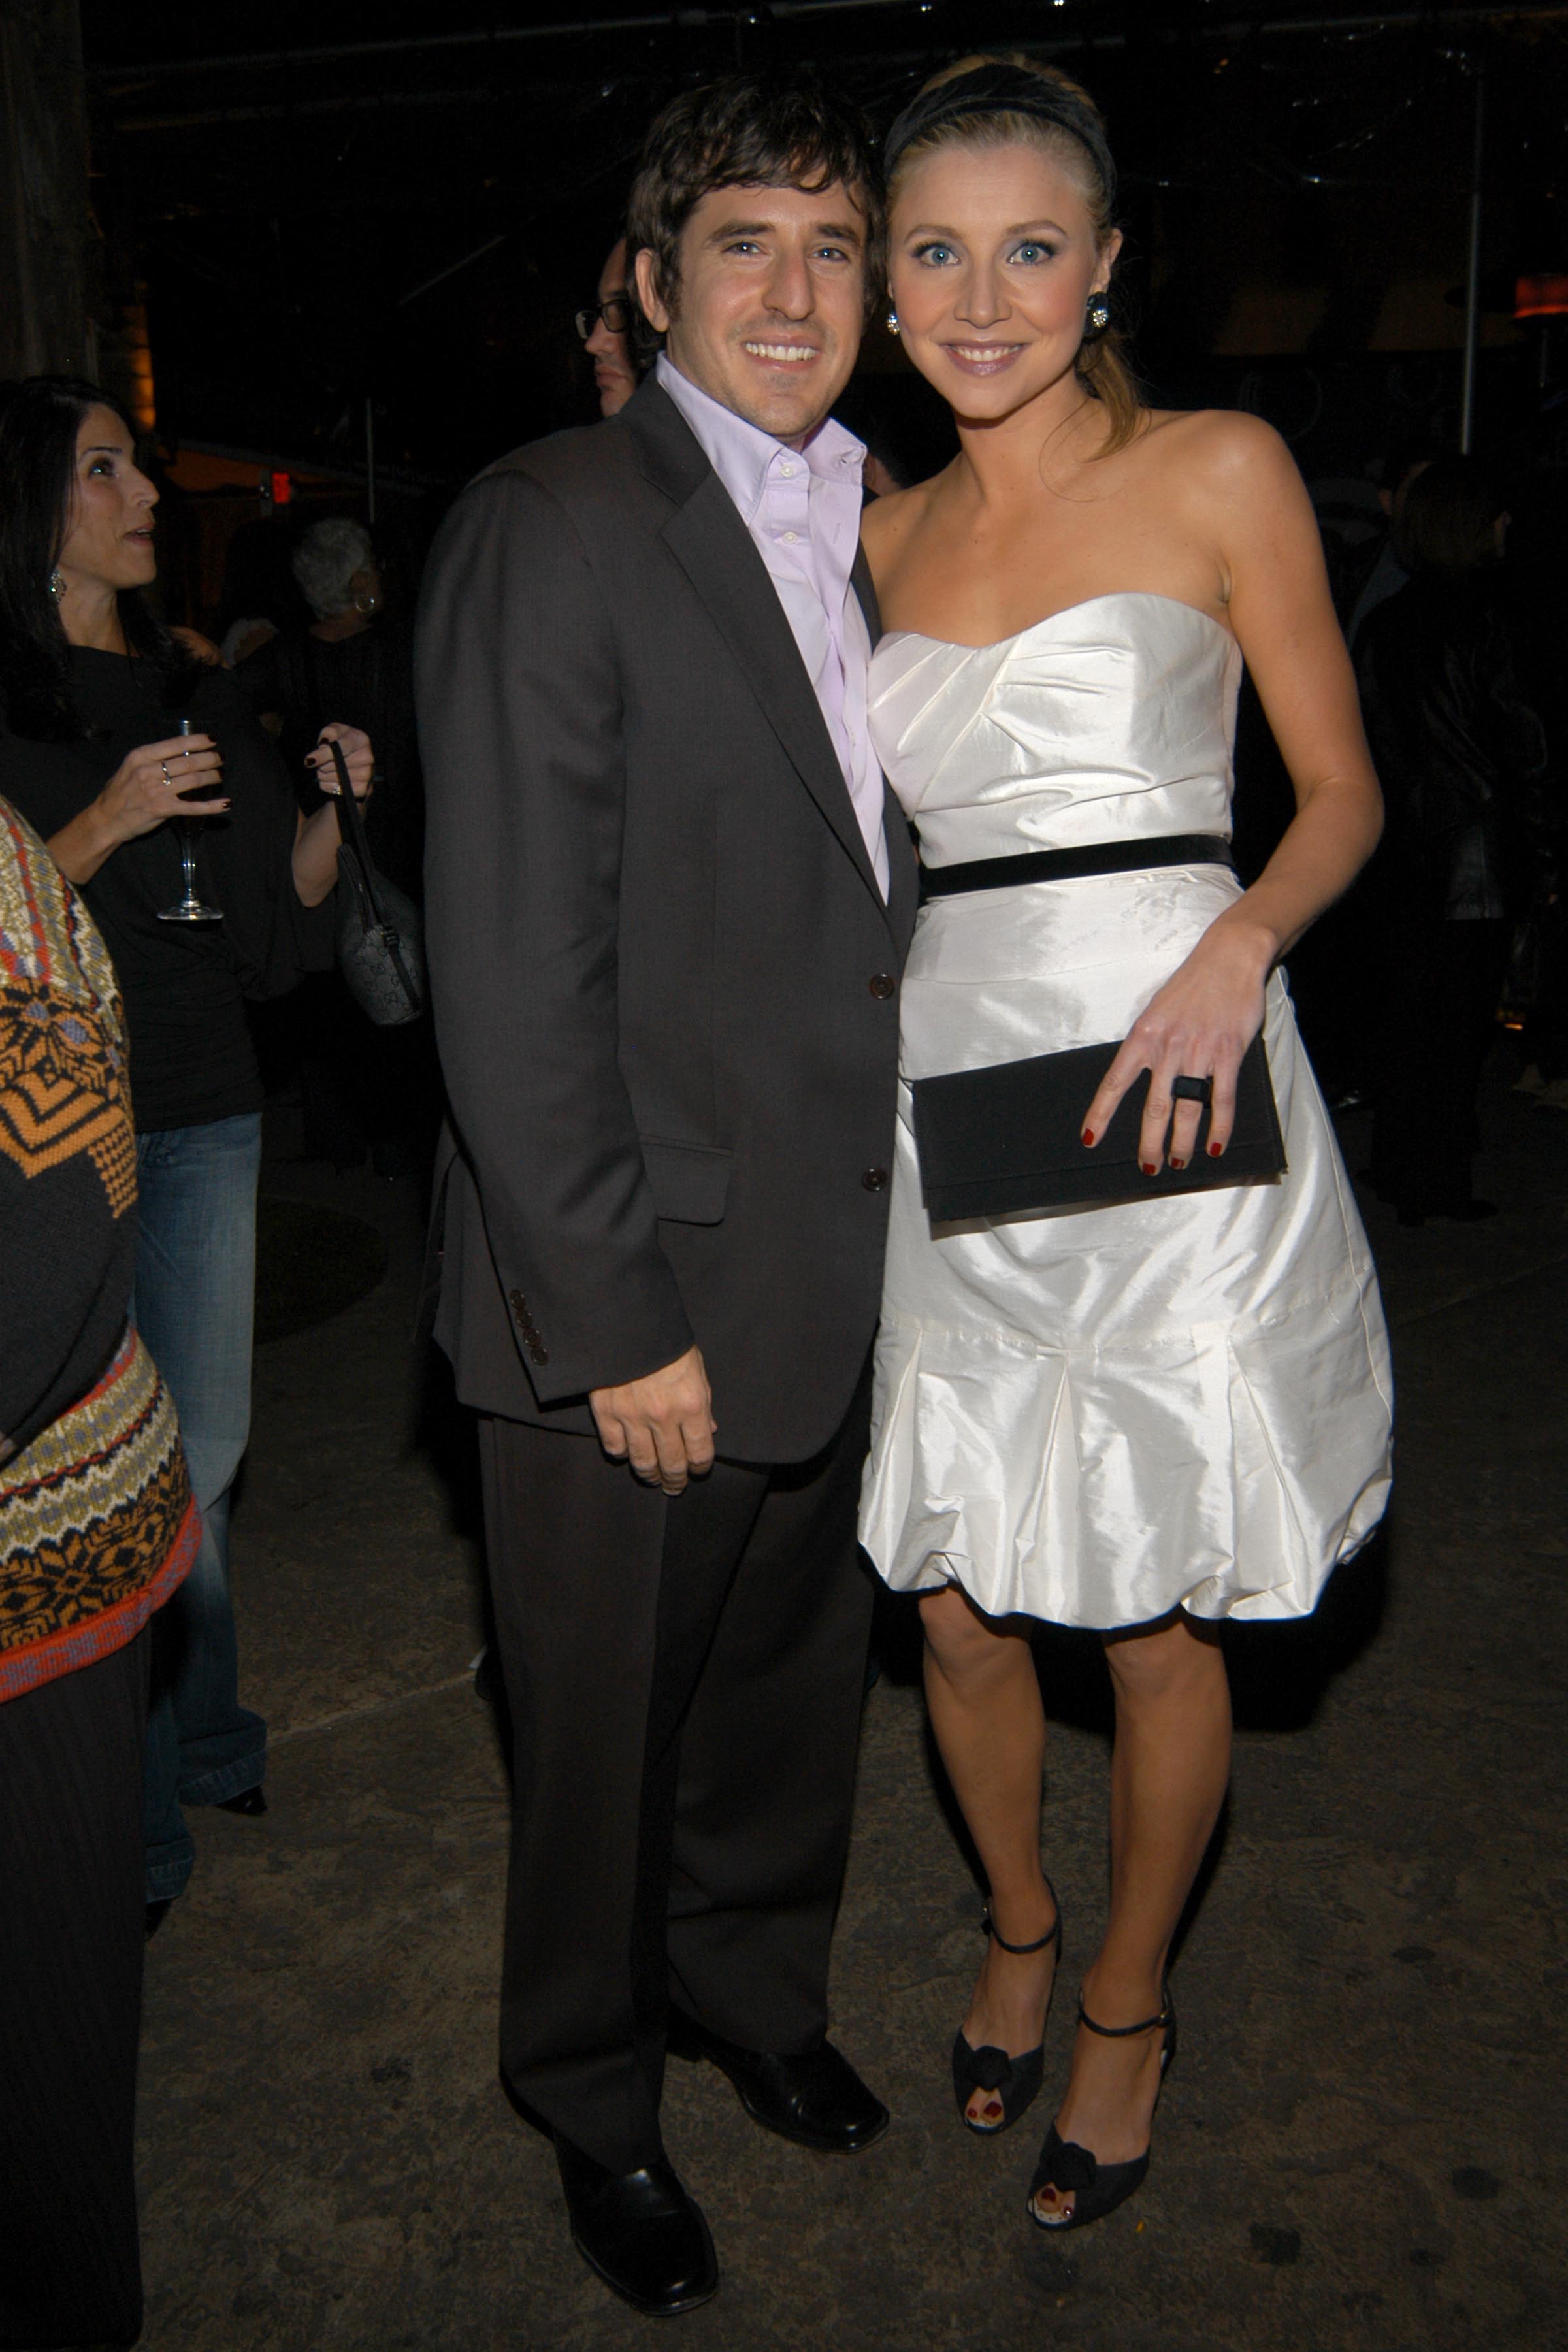 Jamie Afifi and Sarah Chalke at the celebration for "Scrubs" 100th Celebration on January 14, 2006, in California | Source: Getty Images 